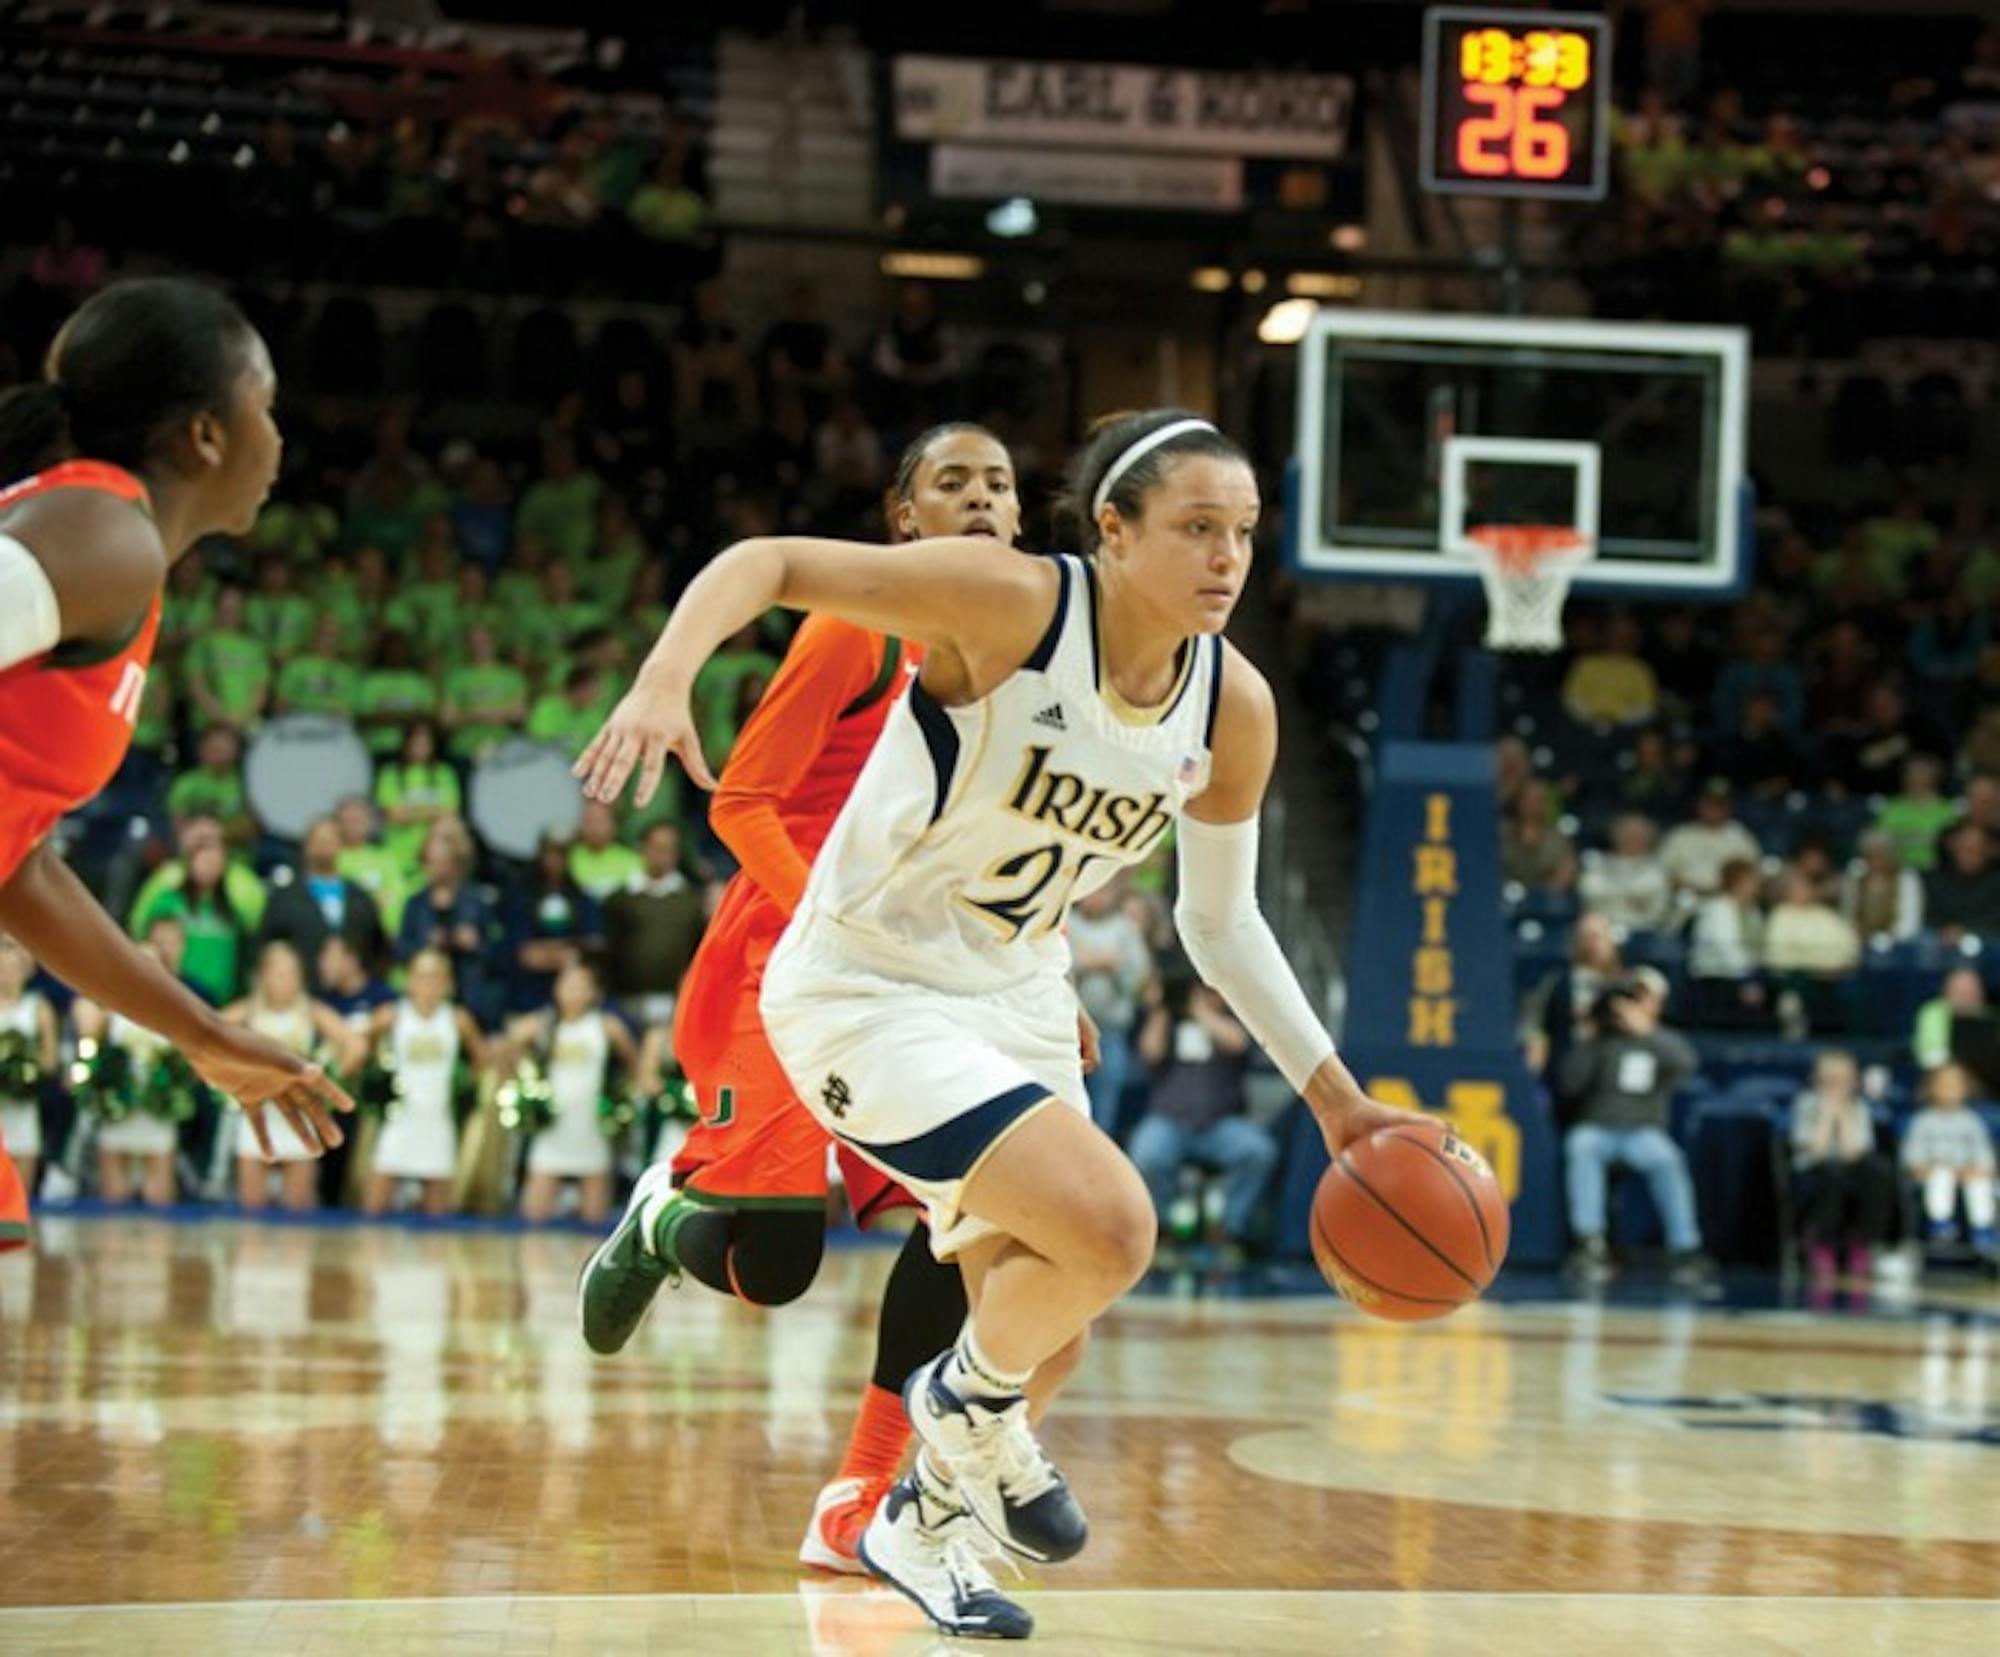 Senior guard Kayla McBride handles the ball during Notre Dame's 79-52 victory Jan. 23 against Miami. Thursday, McBride had 18 points and converted all eight of her free throw attempts.